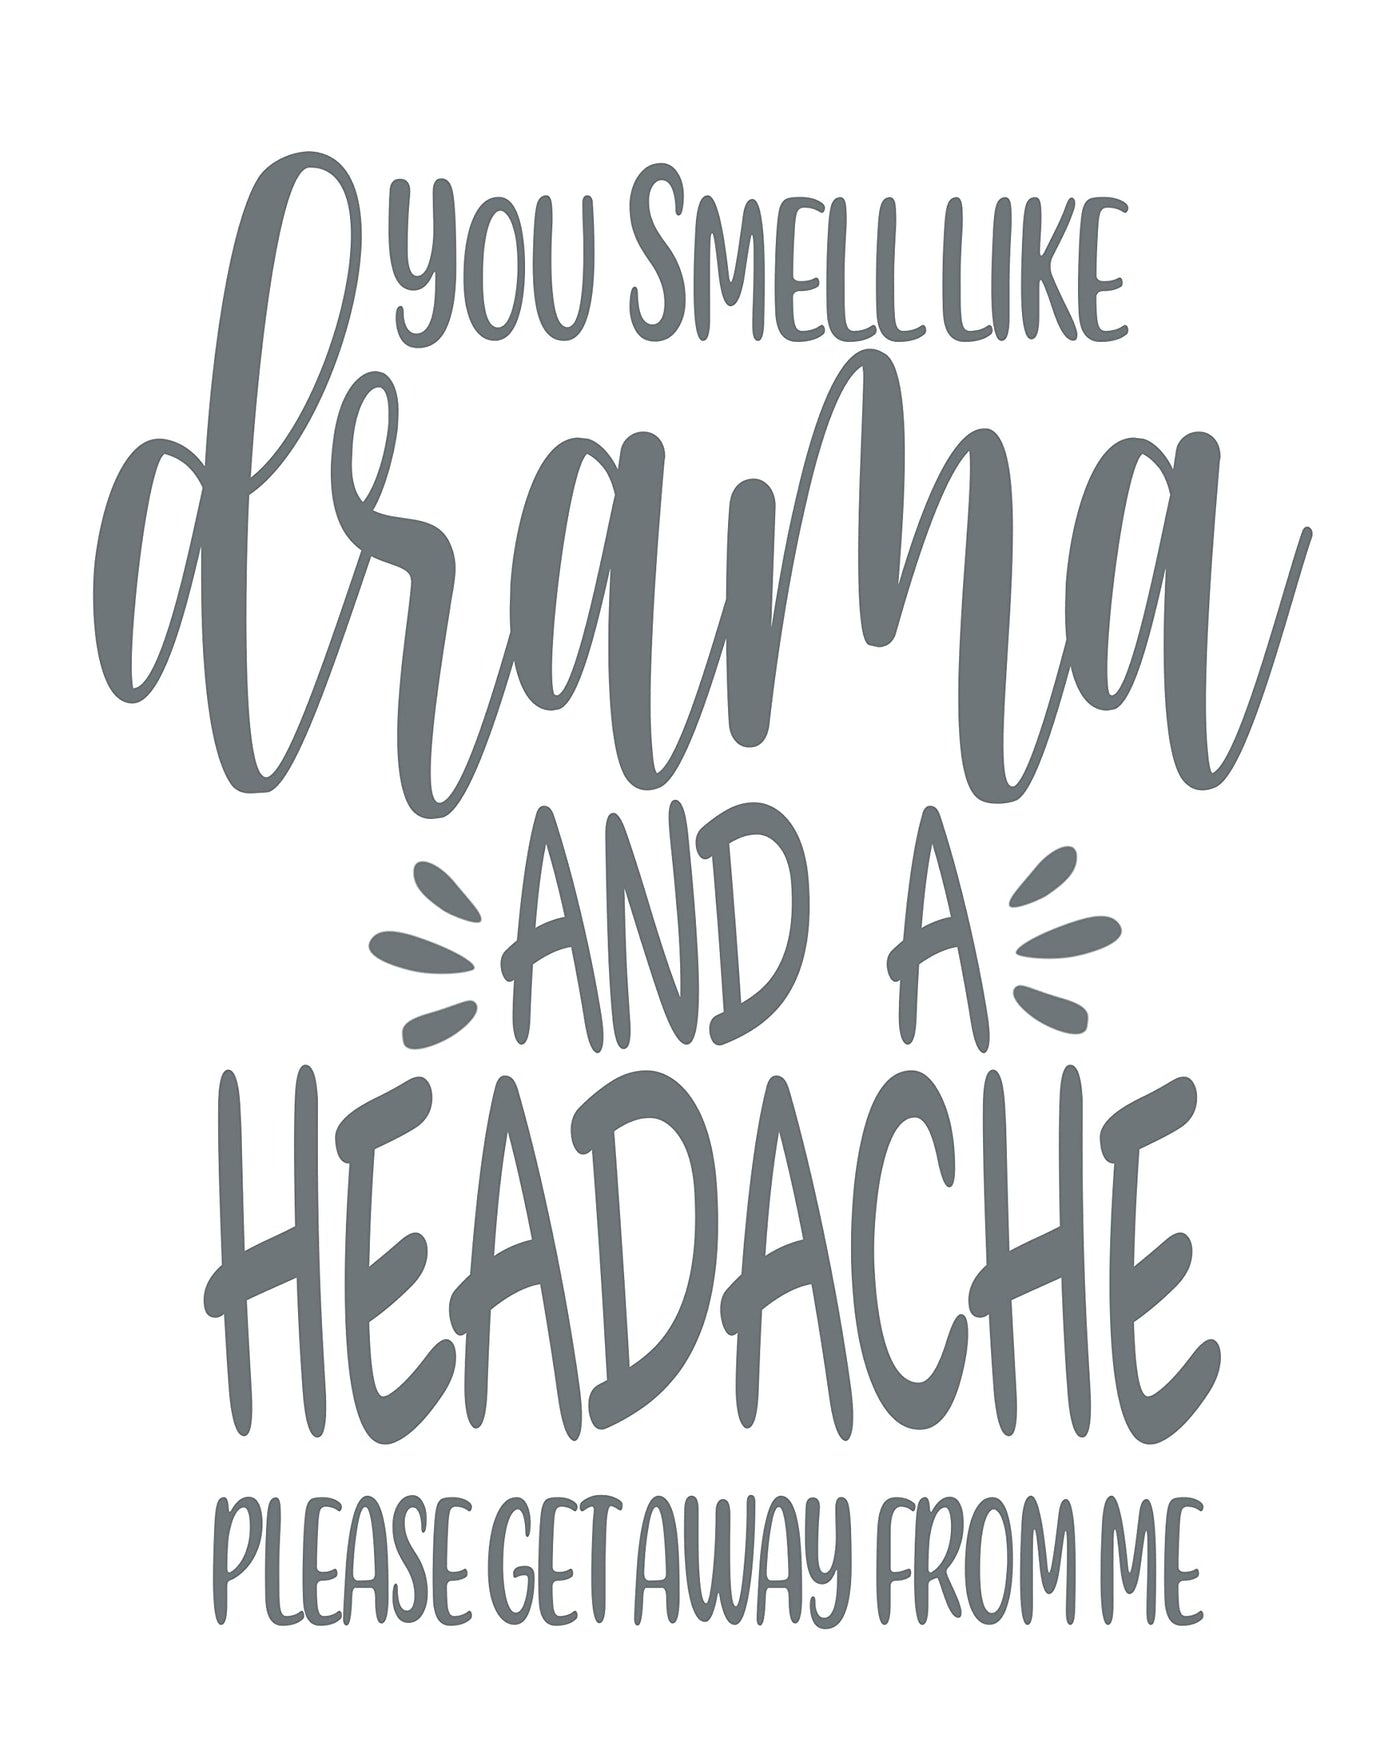 You Smell Like Drama & A Headache-Get Away Funny Wall Sign -8 x 10" Sarcastic Typography Art Print -Ready to Frame. Humorous Decor for Home-Office-Cave-Bar-Shop Decor. Fun Novelty Gift for Friends!